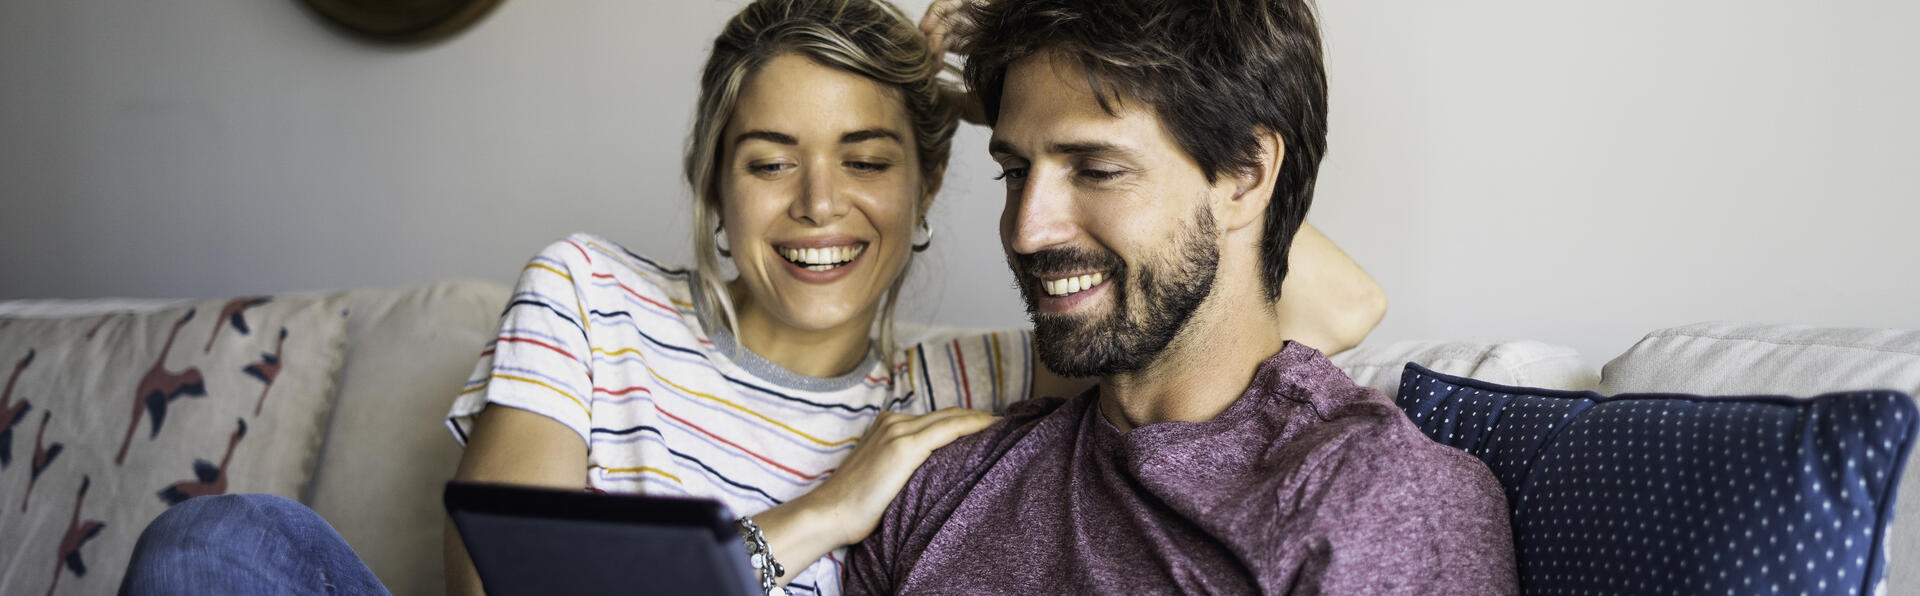 Couple happily looing at a tablet